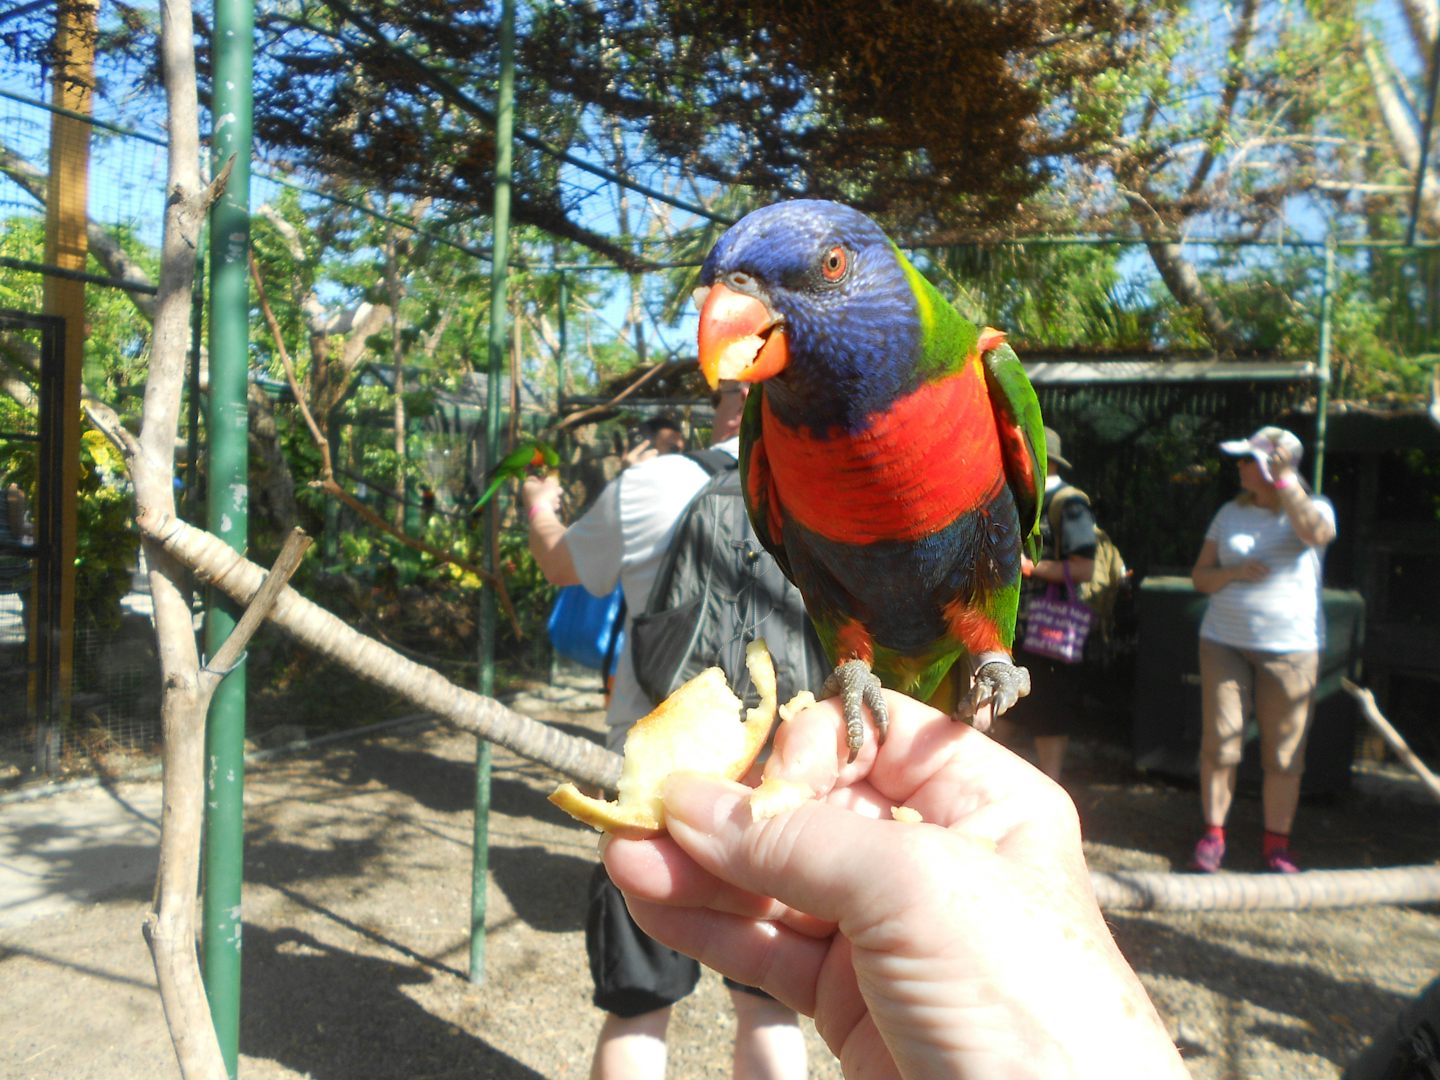 Little bird eating an apple slice from my hand at the zoo in Nassau.